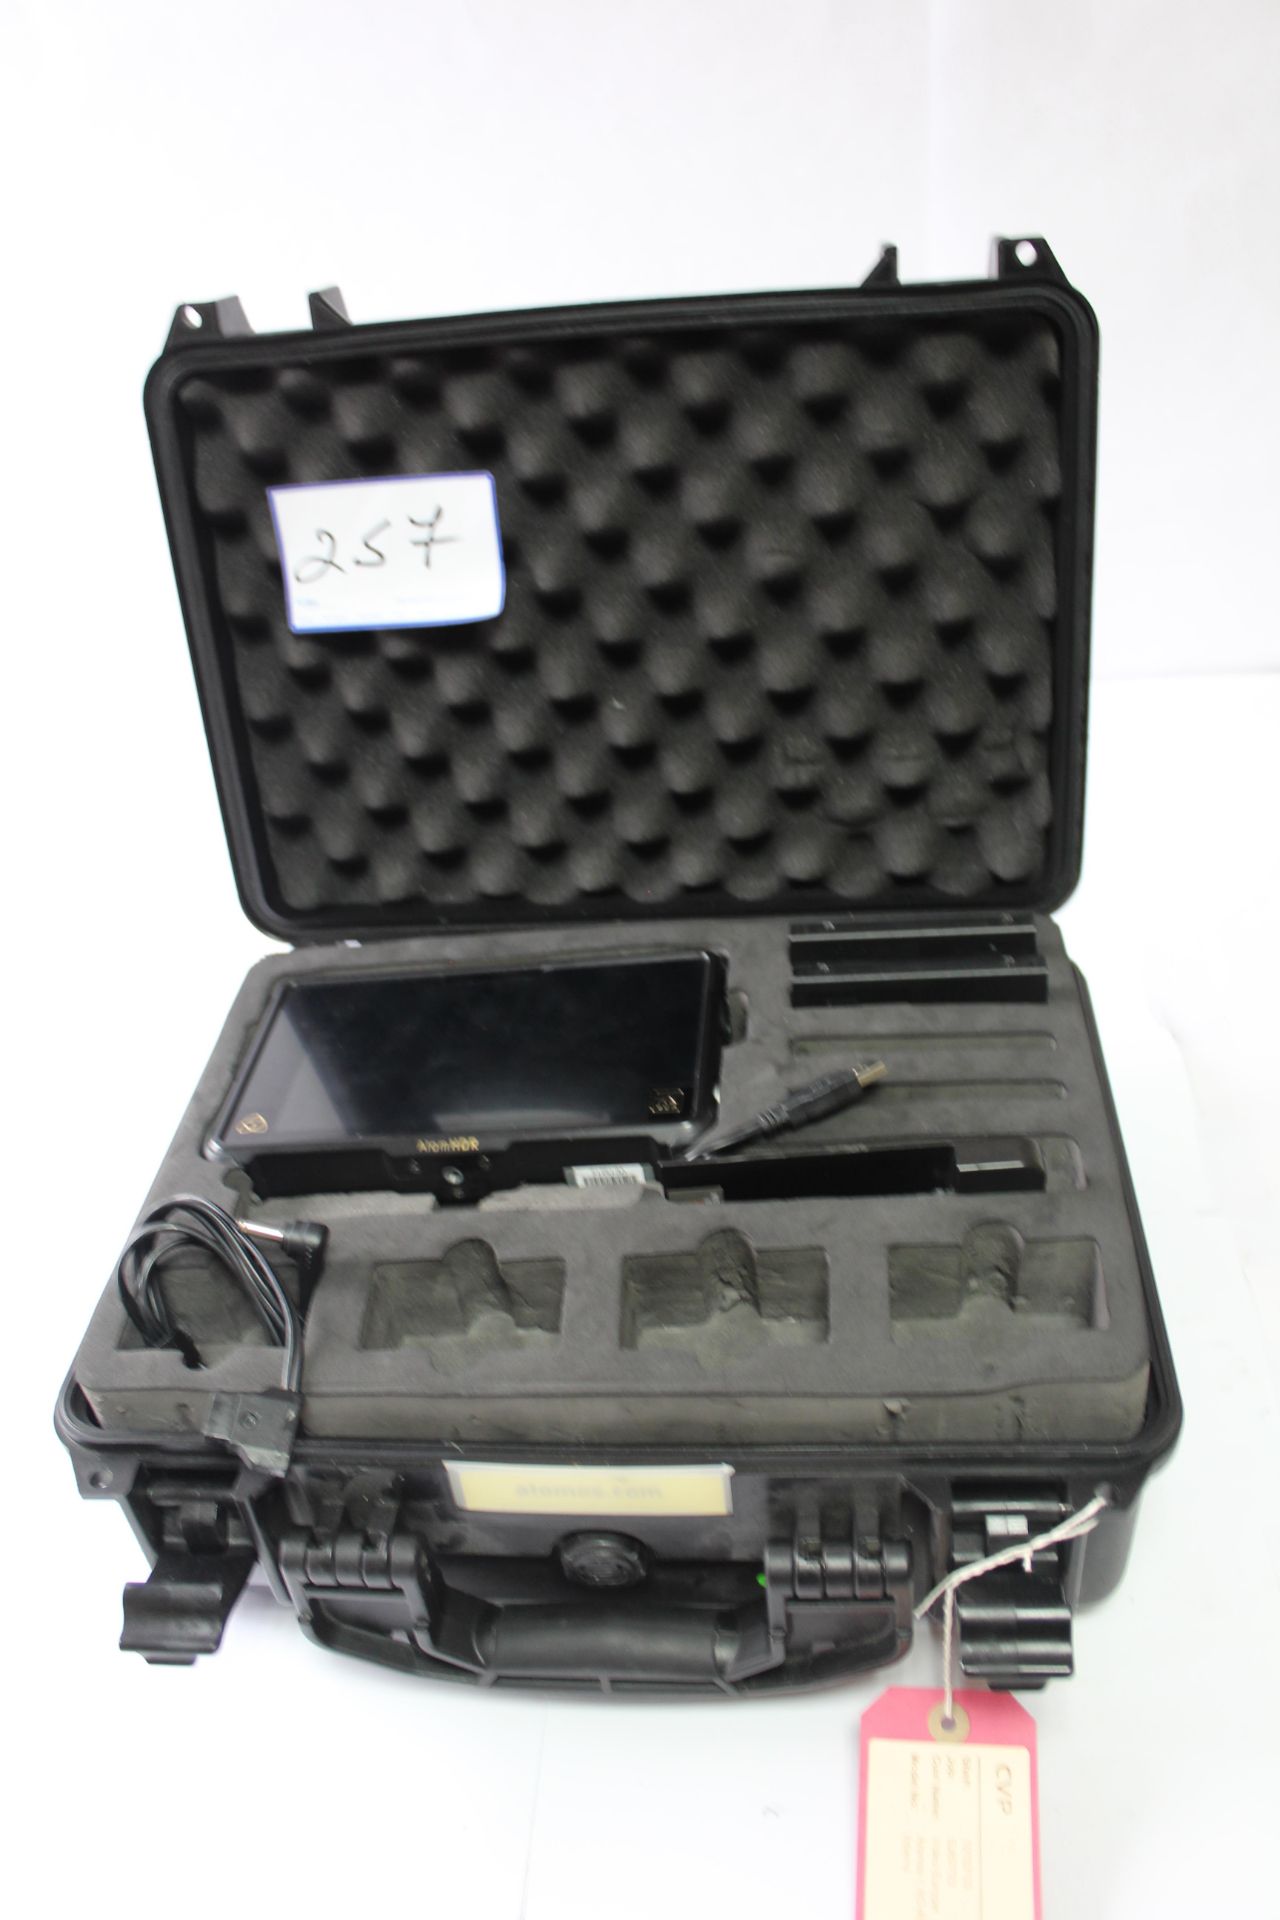 Atamos Shogun Inferno Field Monitor and Accessories with Flight Case.